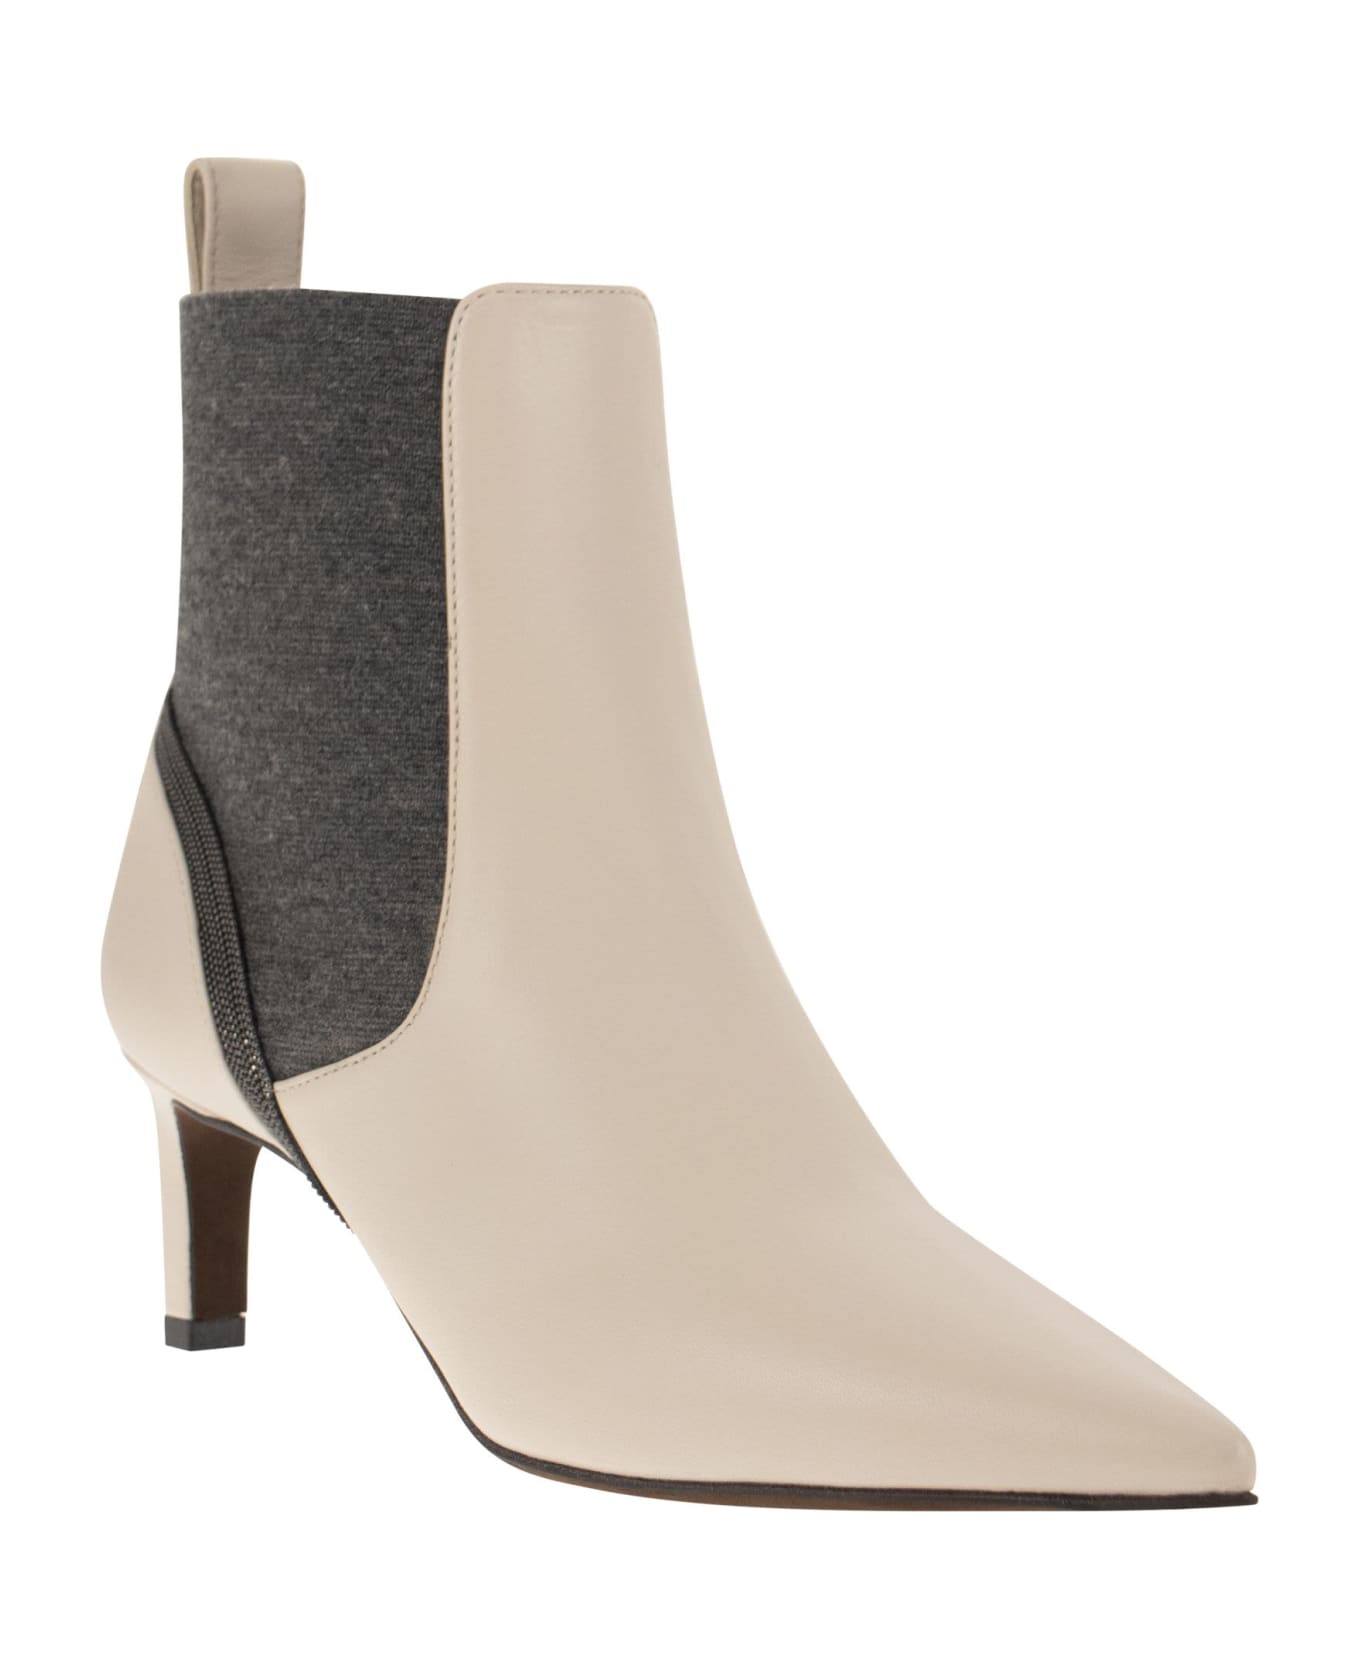 Brunello Cucinelli Leather Heeled Ankle Boots With Shiny Contour - Ivory/grey